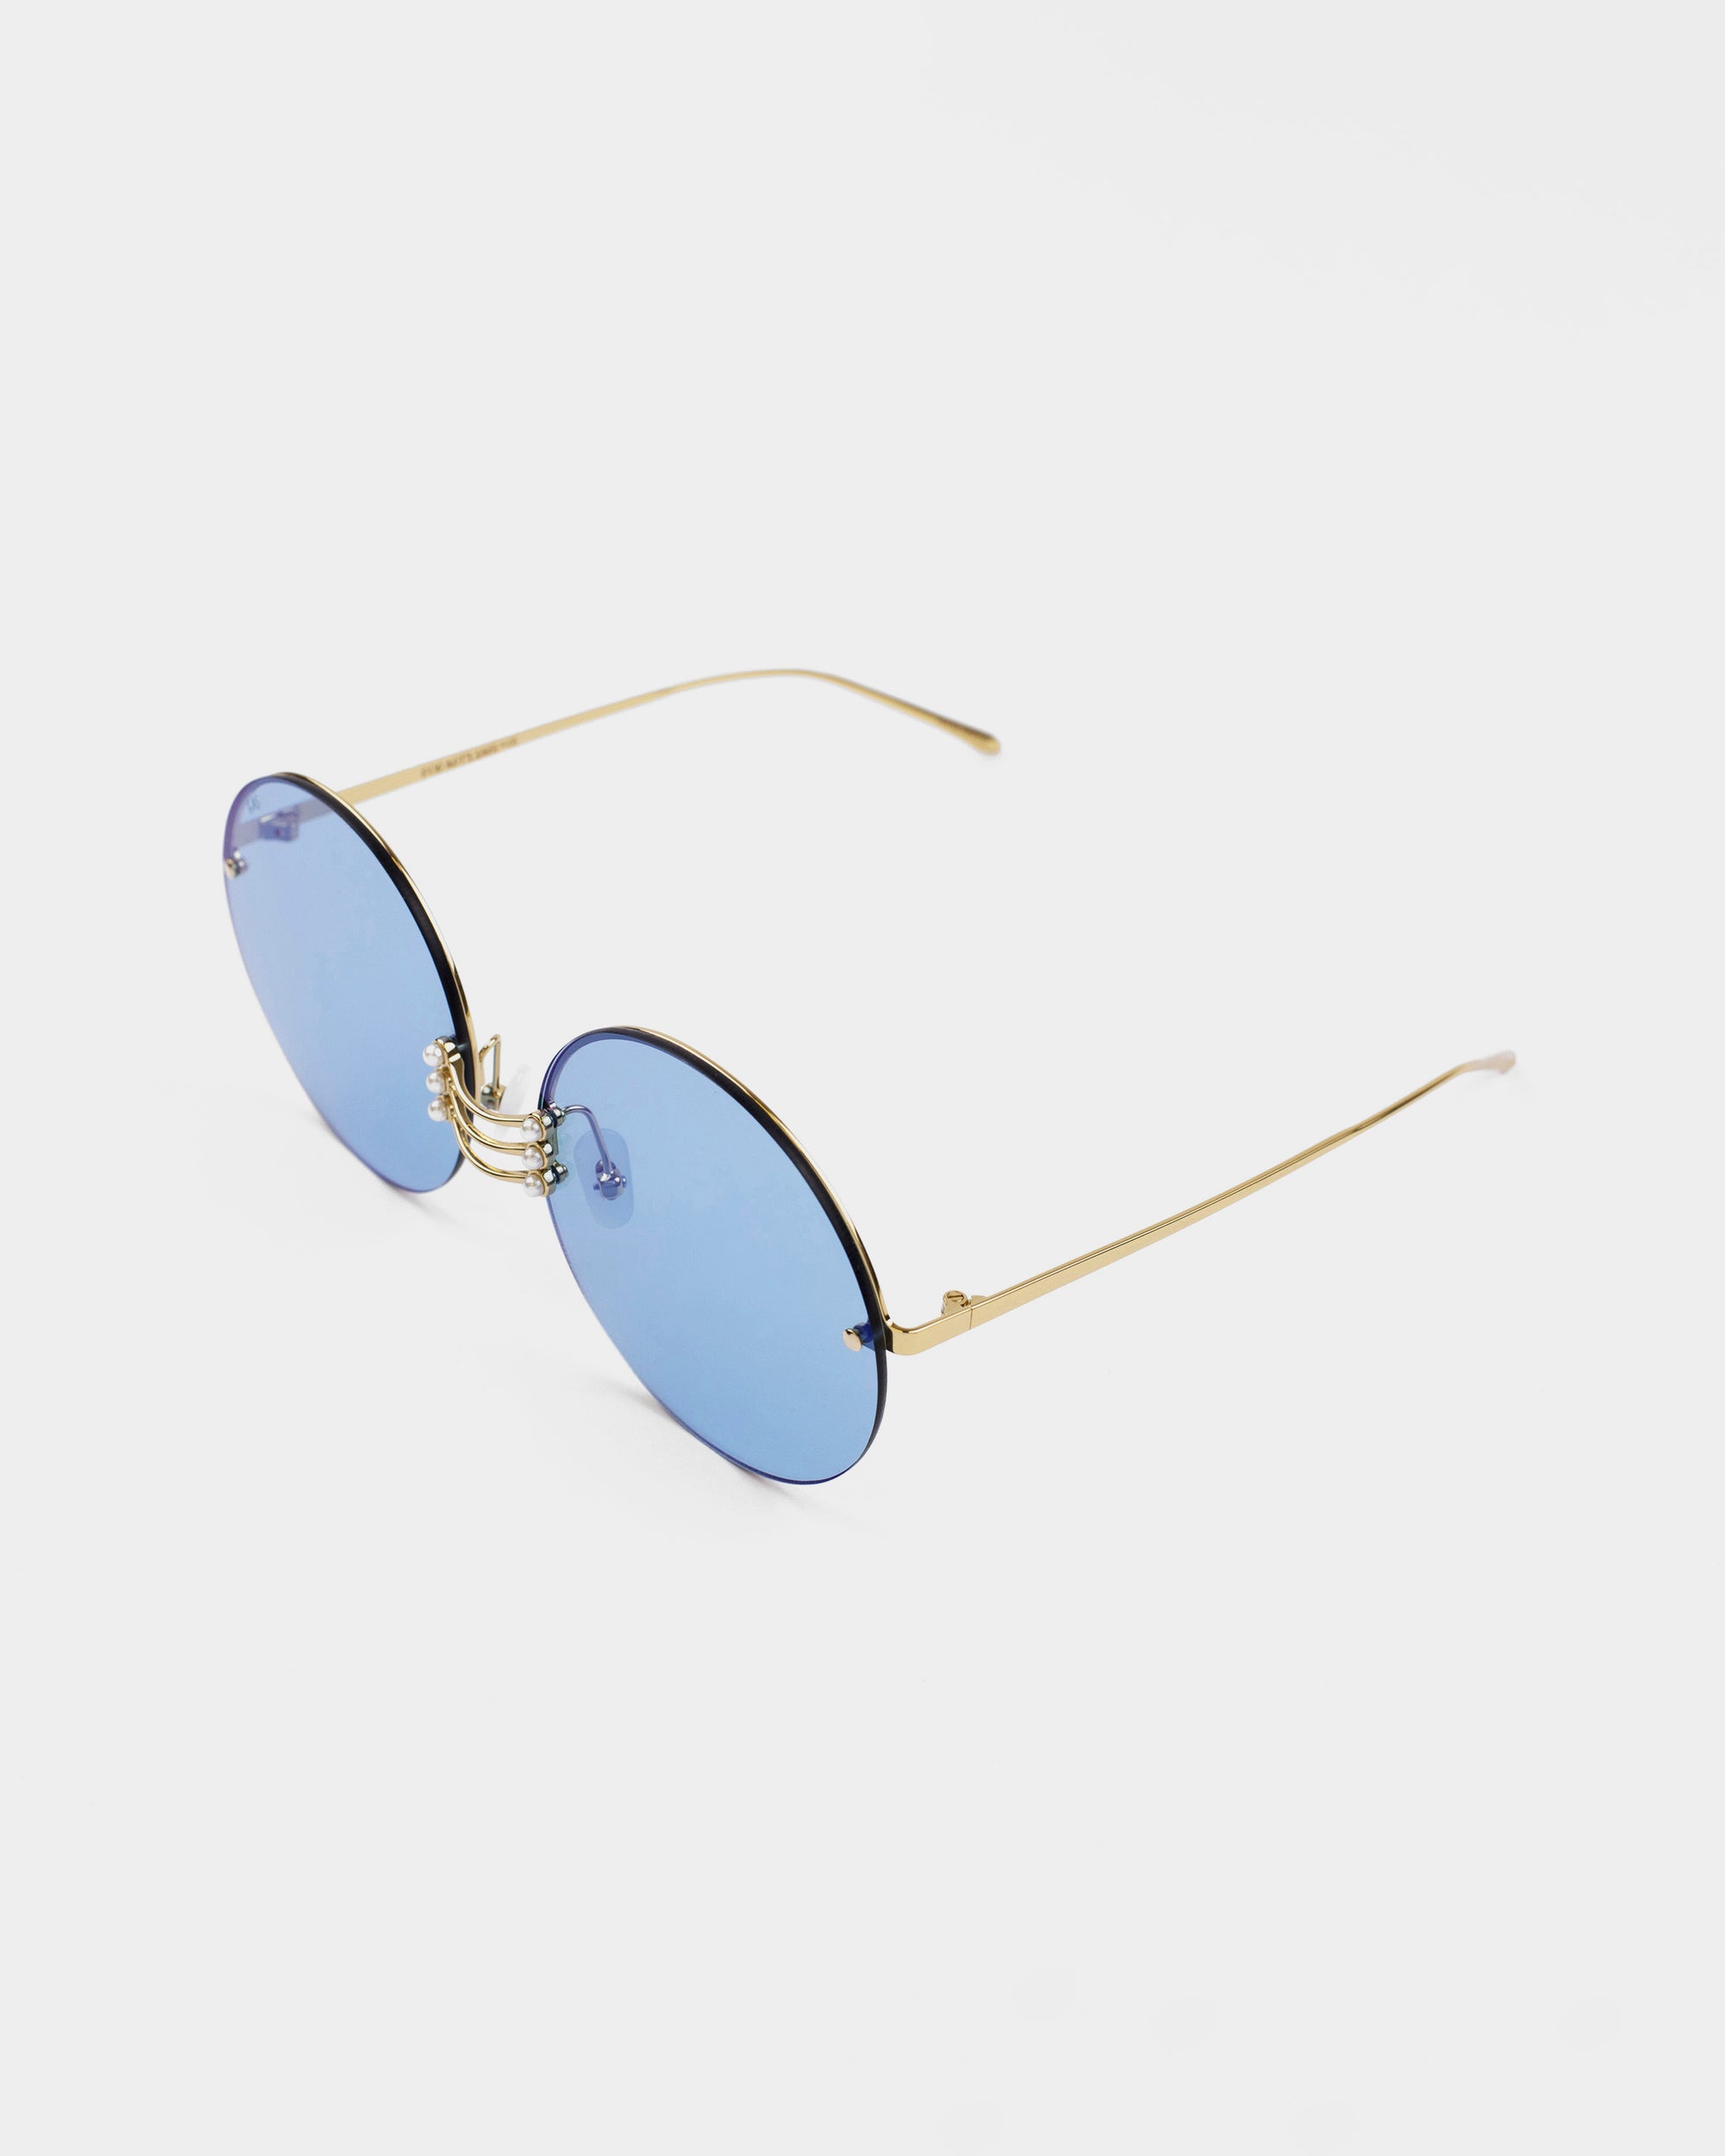 A pair of stylish For Art&#39;s Sake® Vermeer sunglasses with round blue lenses and slender stainless steel frames. The temples are straight and also gold, providing a minimalist yet elegant design. The gemstone nosepads add a touch of luxury, while the UV protection ensures your eyes stay safe. The background is plain white, highlighting the sleek and modern appearance of the sunglasses.